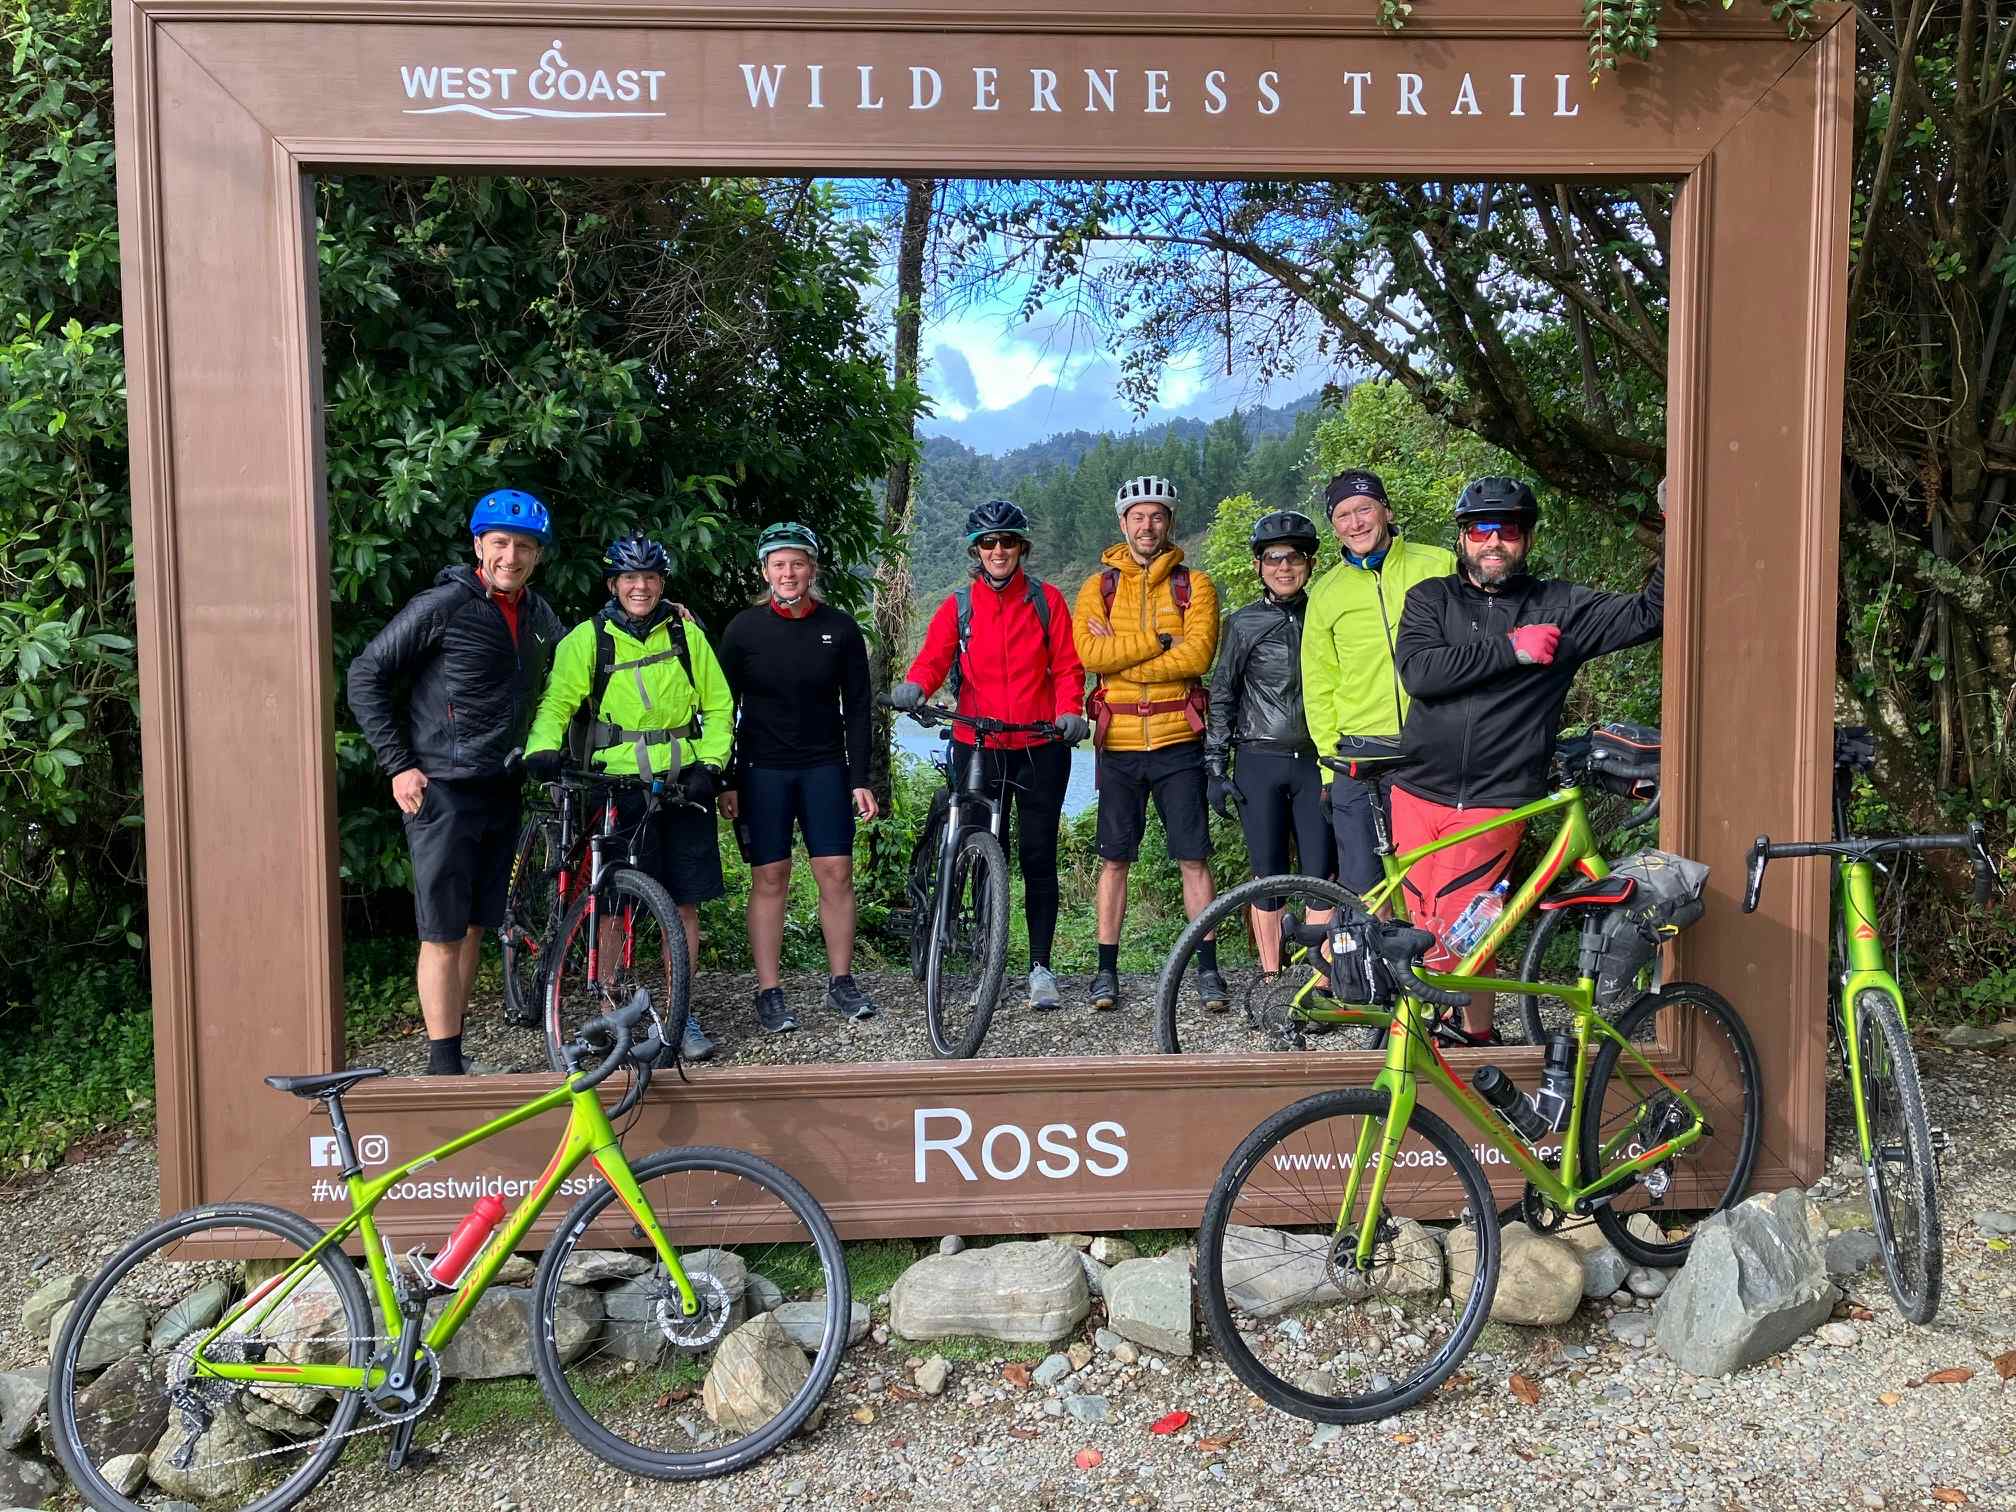 Cyclists at the start point of the West Coast Wilderness Trail on New Zealand's South Island